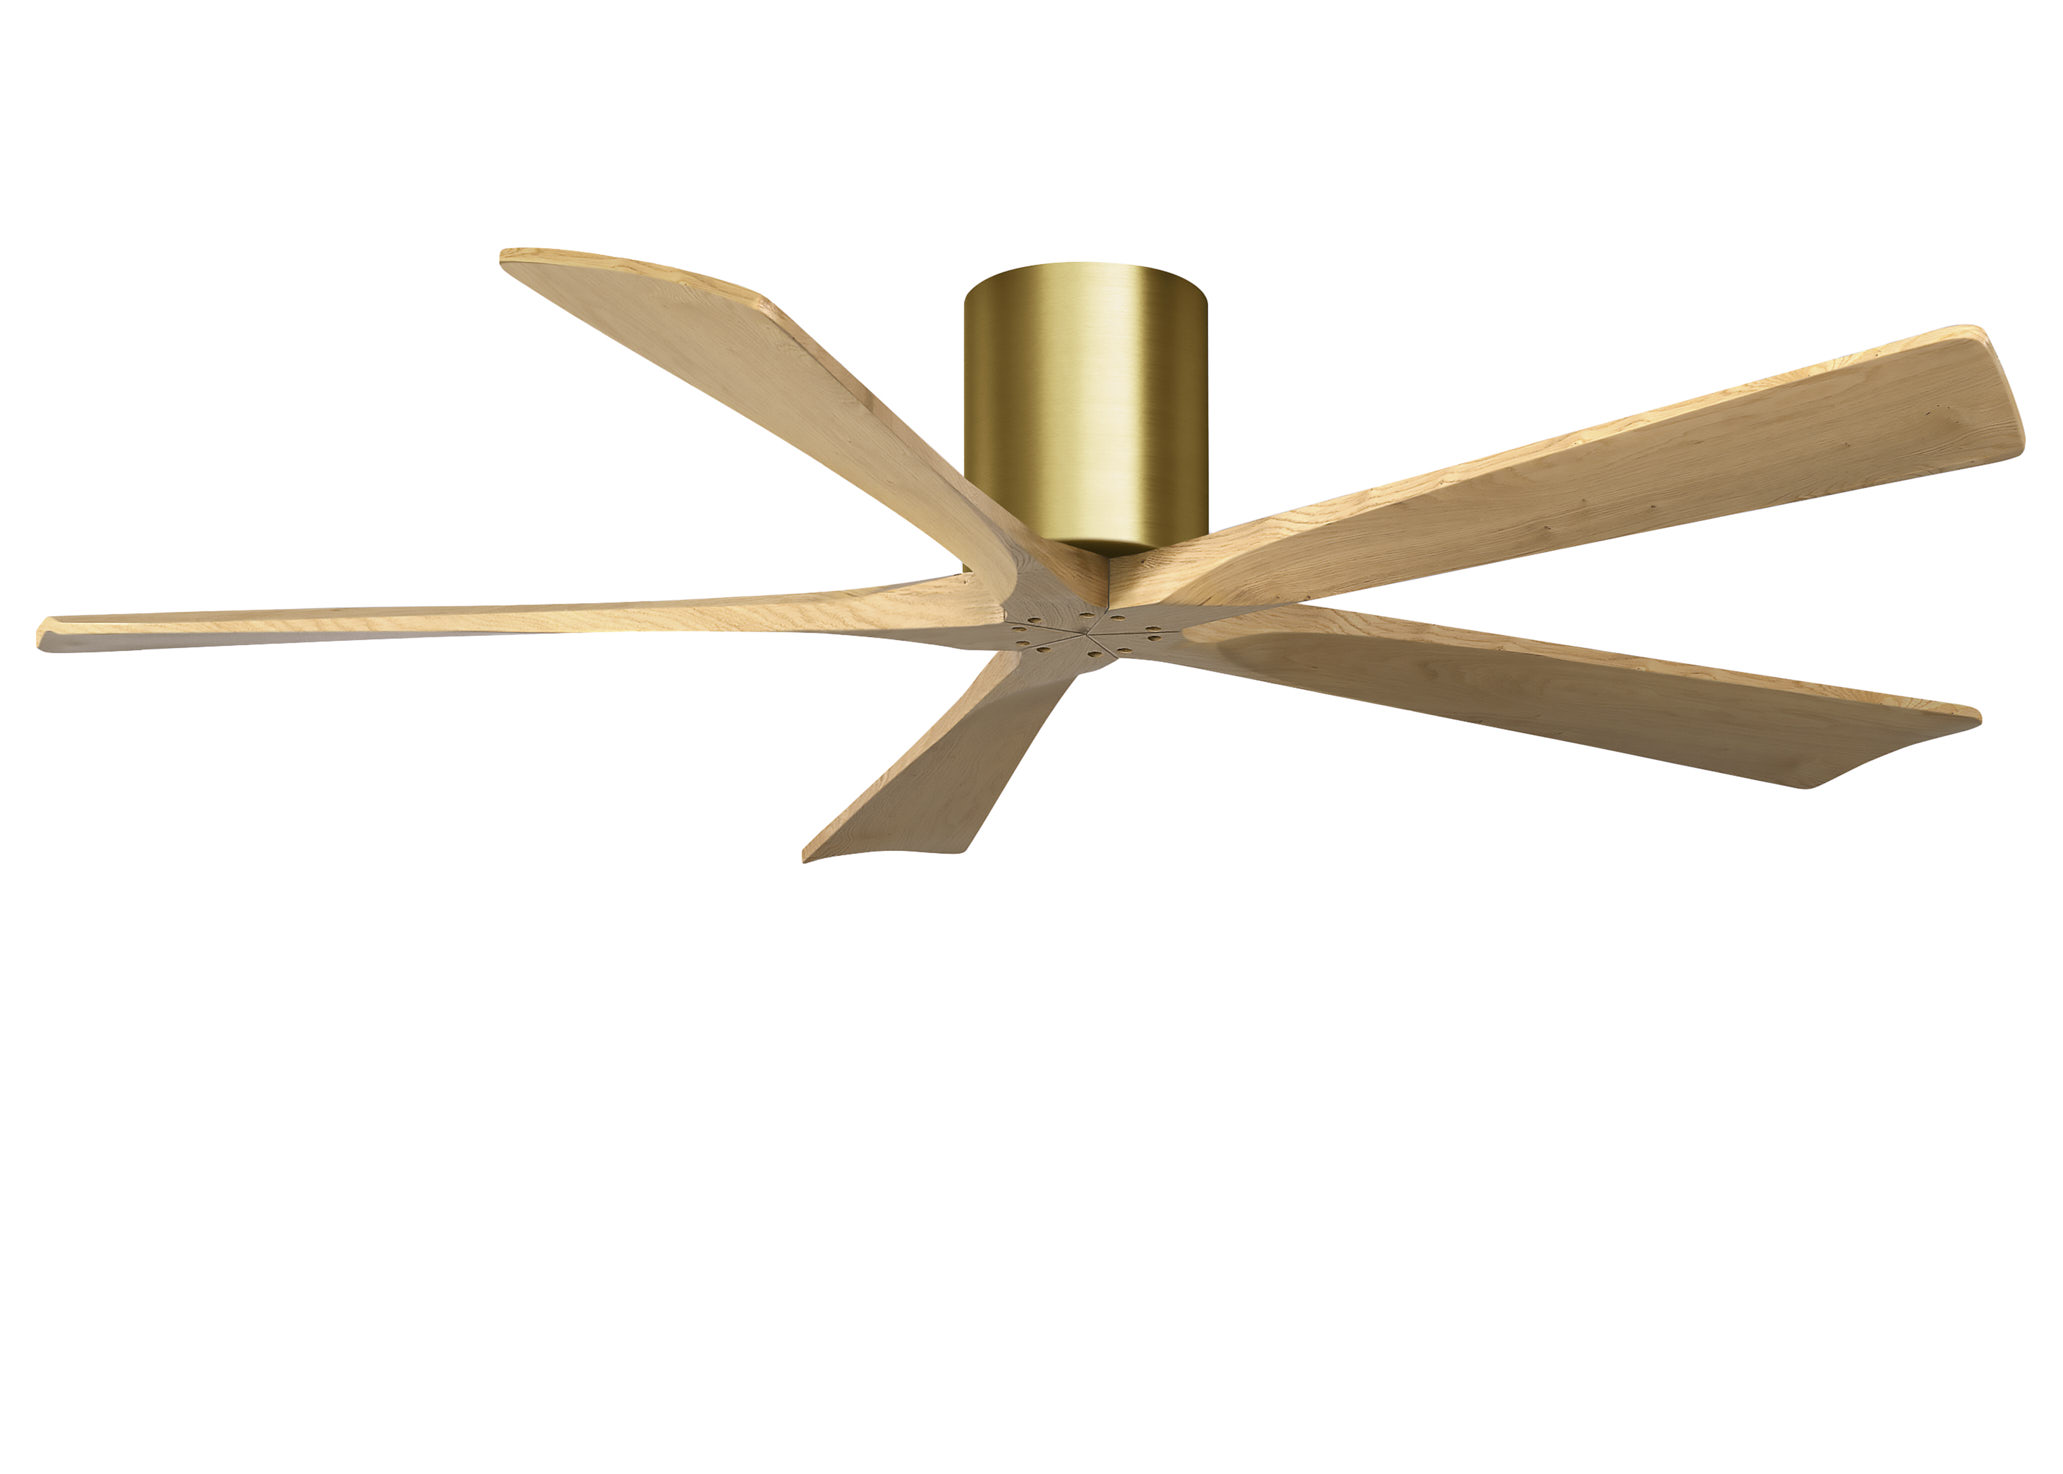 Irene-5H 6-speed ceiling fan in brushed brass finish with 60